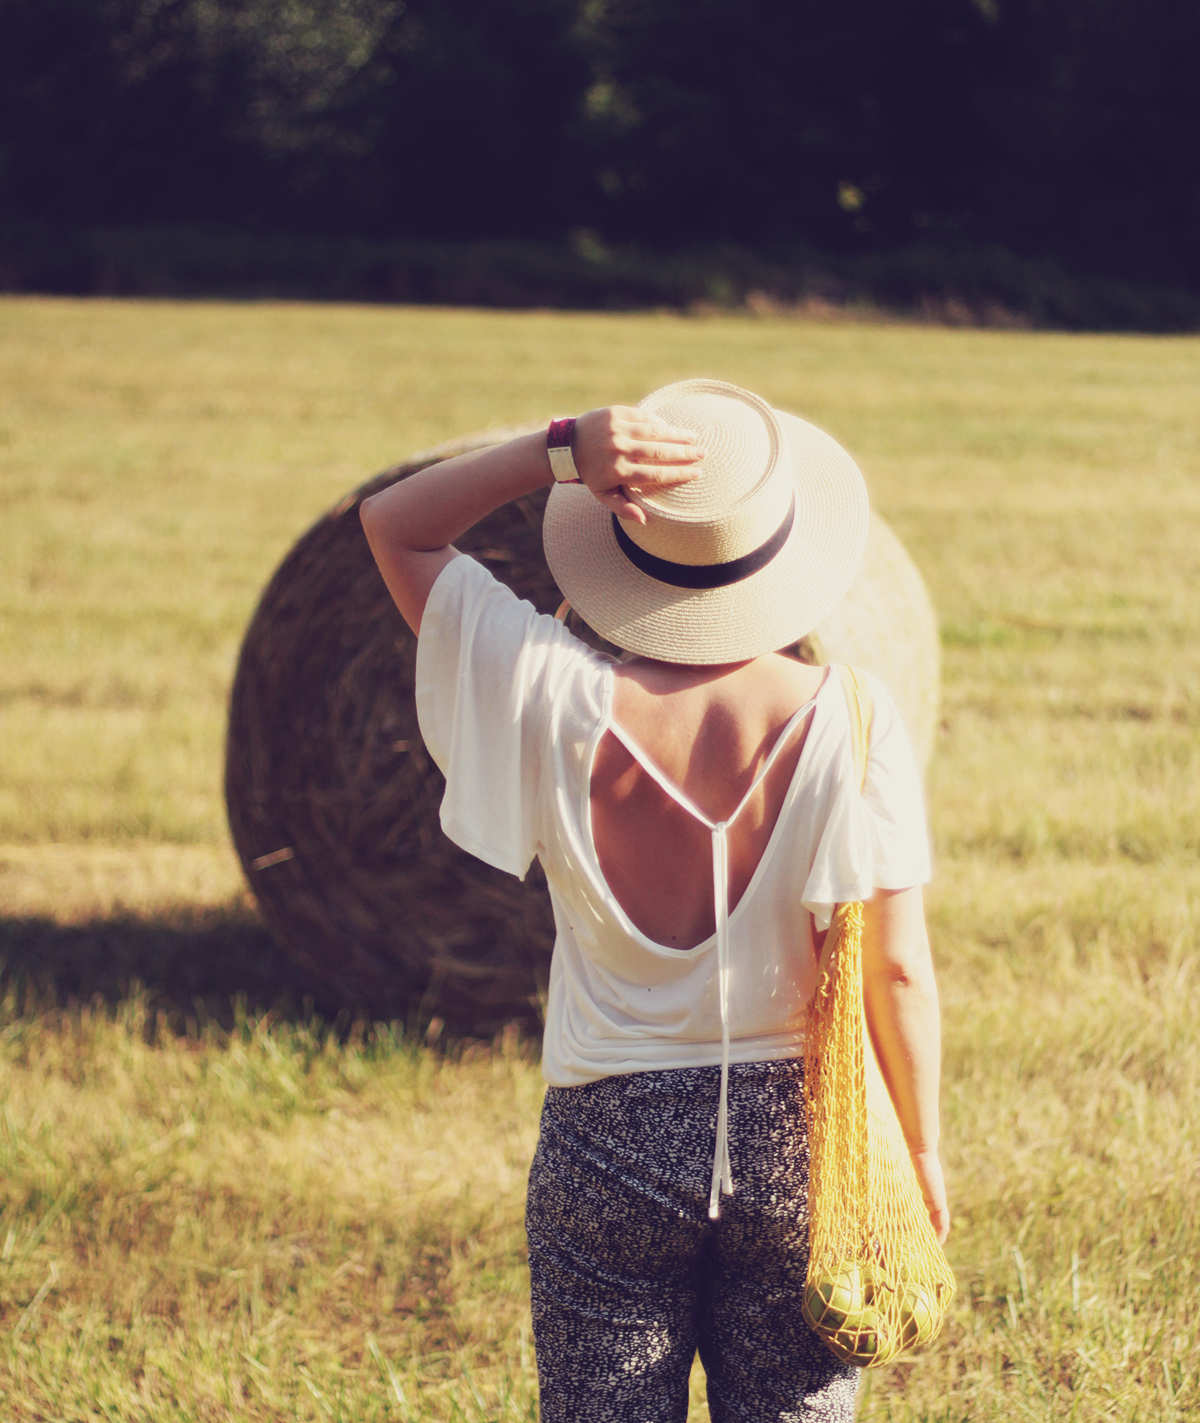 summer boho chic, straw hat, backless top, travel, summer pants, festival look, bohemian, summer look, round haystack